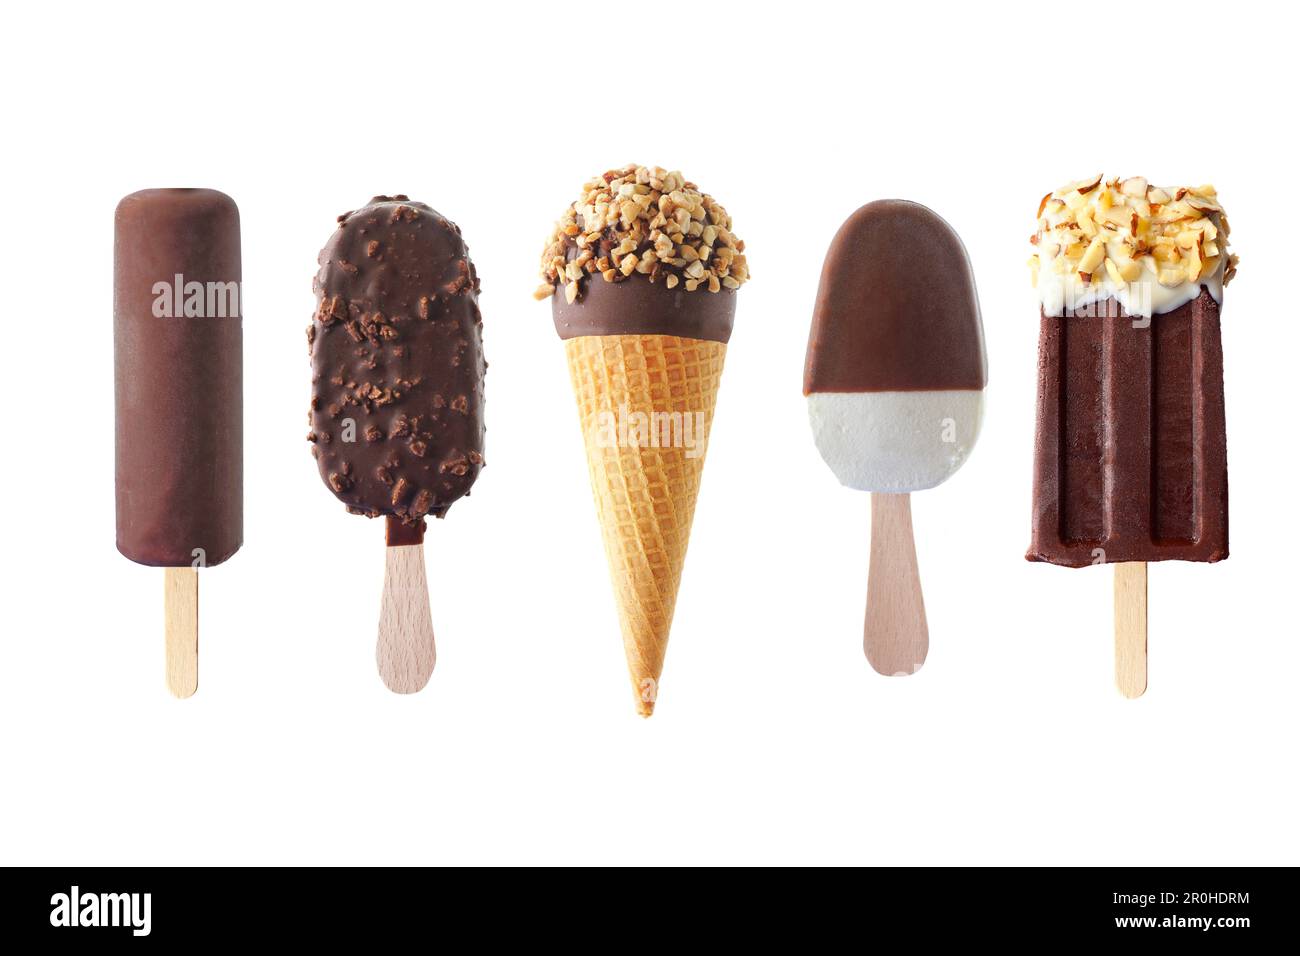 Set of unique summer chocolate popsicle and ice cream treats isolated on a white background Stock Photo